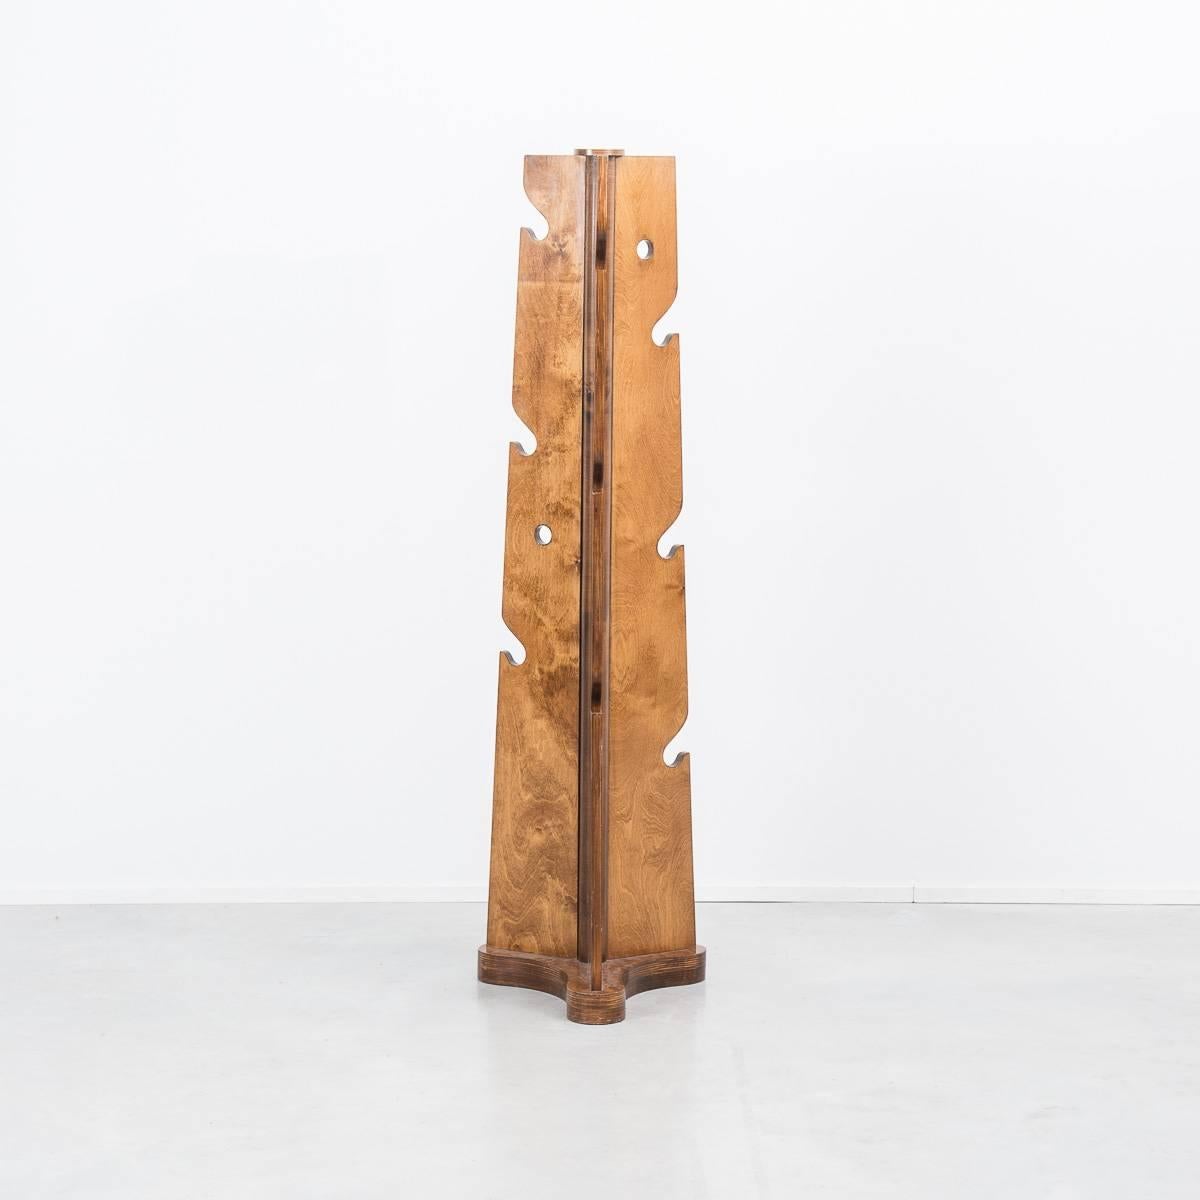 Coat hanger or sculpture? This coat stand originates from Italy, circa 1960s. Its TOTEM like shape has a really playful and surreal aesthetic, contrasting with a traditional French polish finish. Created with three faces it would work well against a